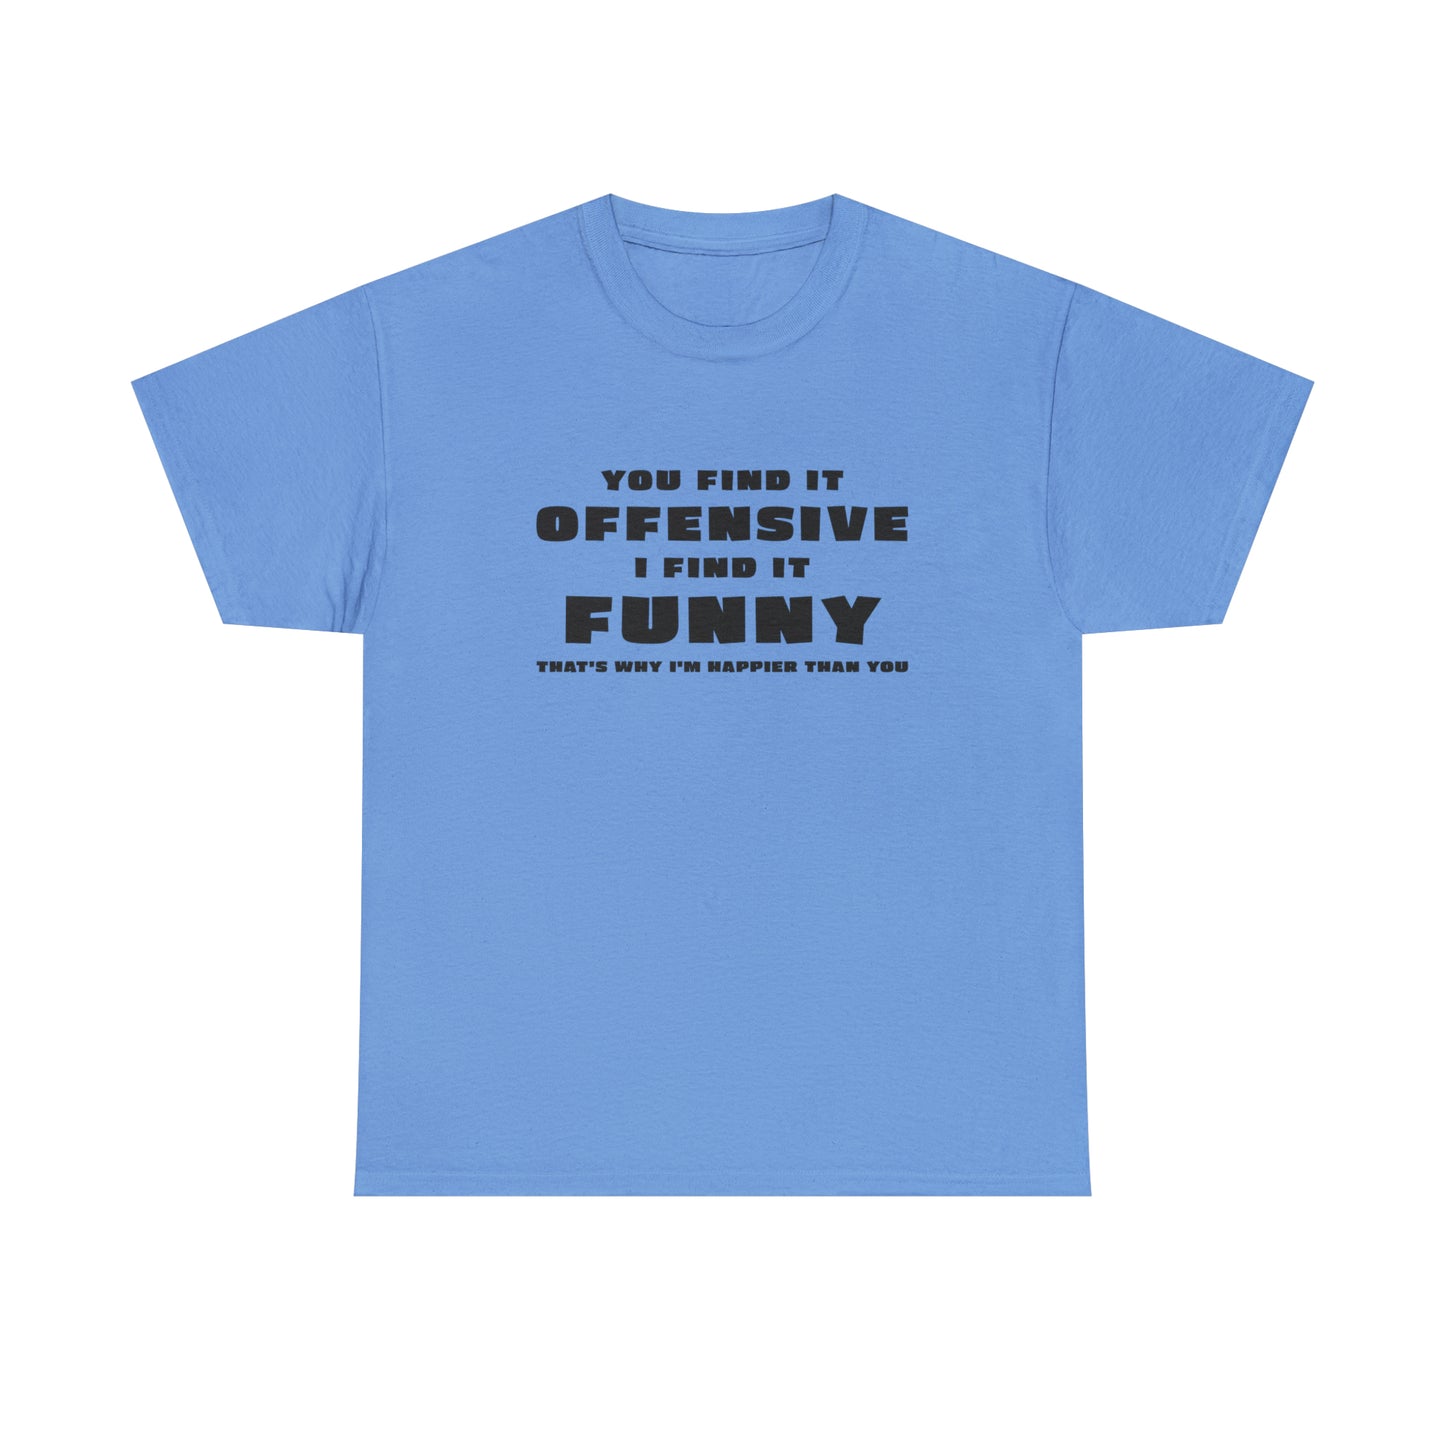 Funny T-Shirt For Offensive T Shirt For Being Happy TShirt For Sarcastic Tee